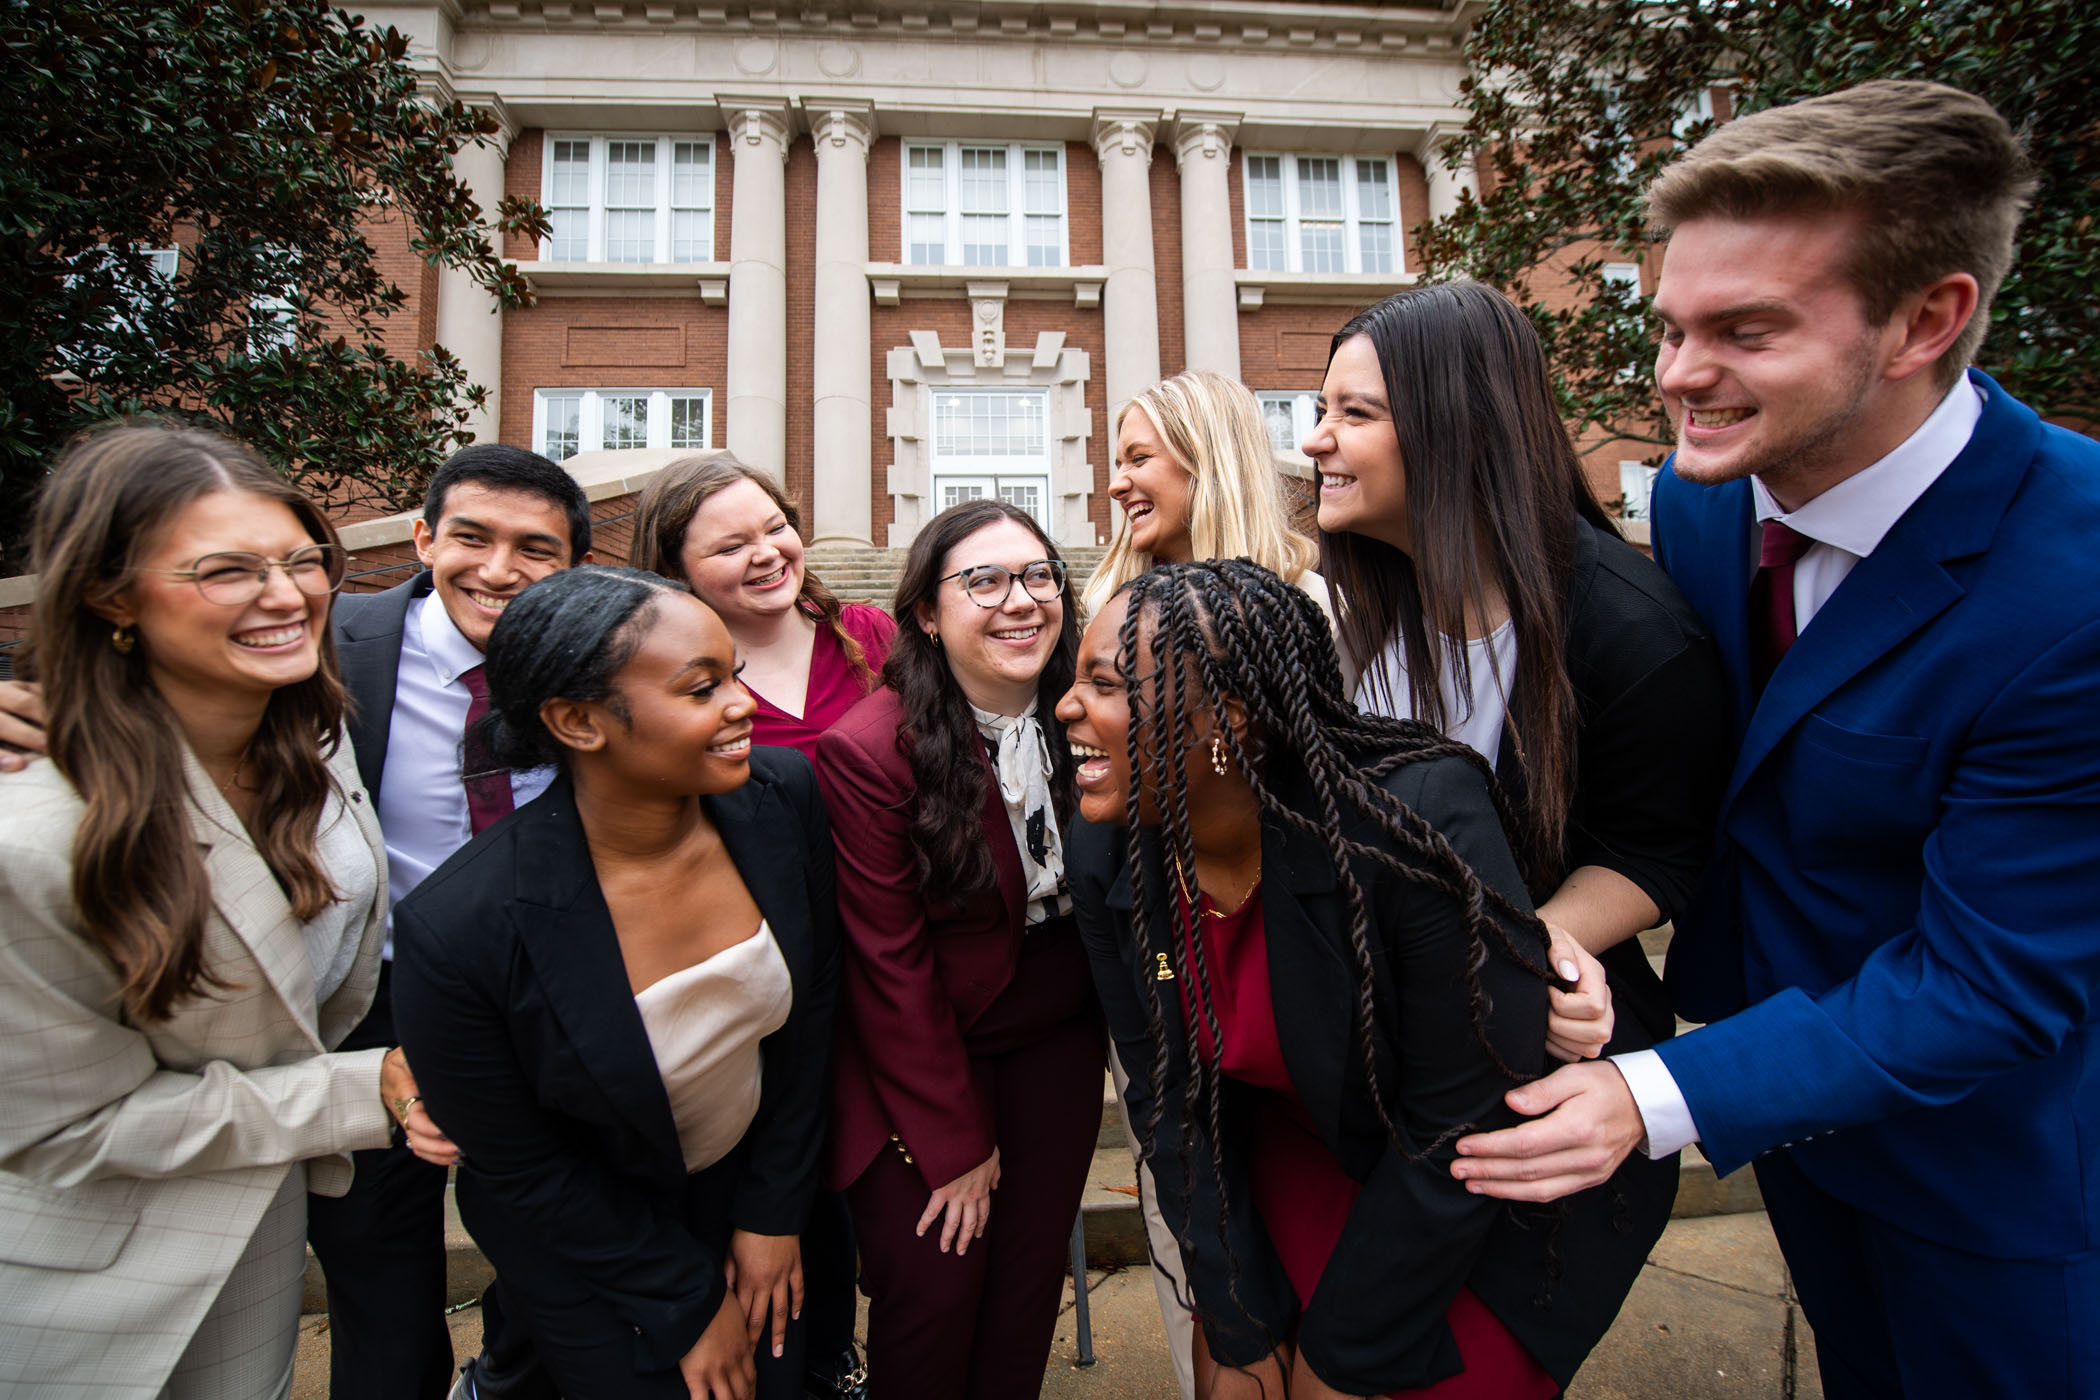 MSU Student Association Executive Council members lean in for hugs and laughs in front of the Swalm Chemical Engineering building